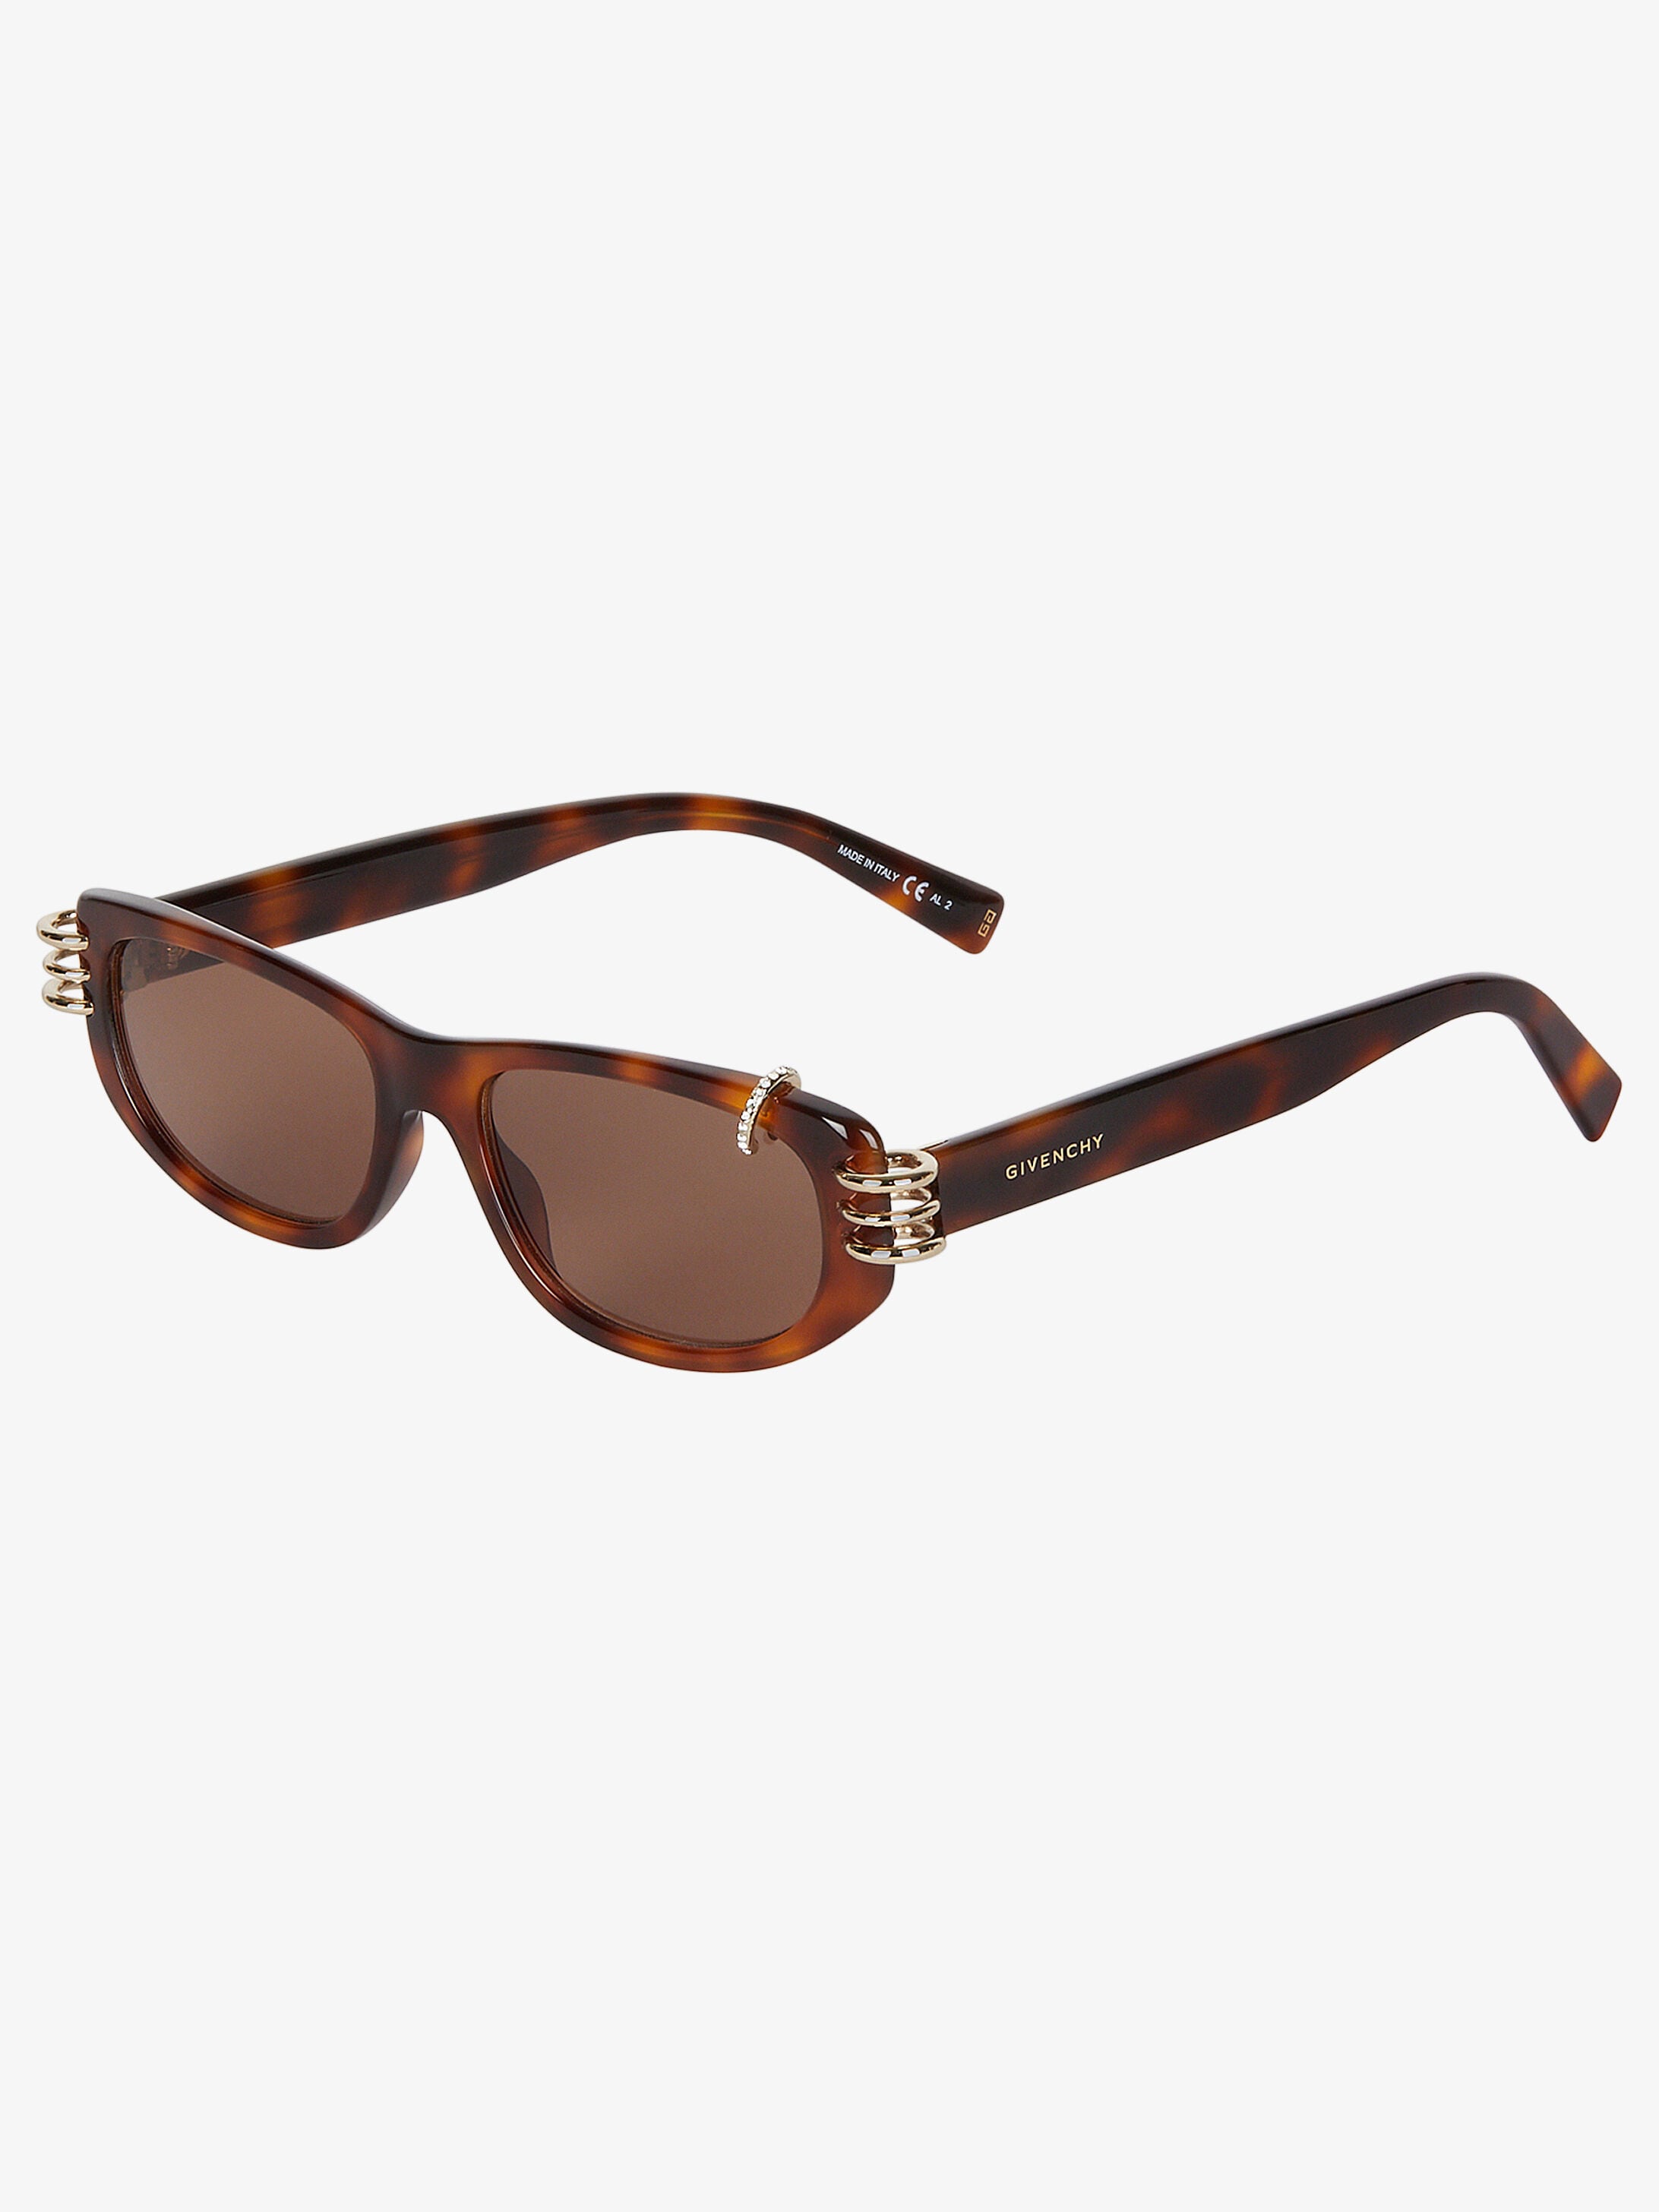 givenchy sunglasses for women